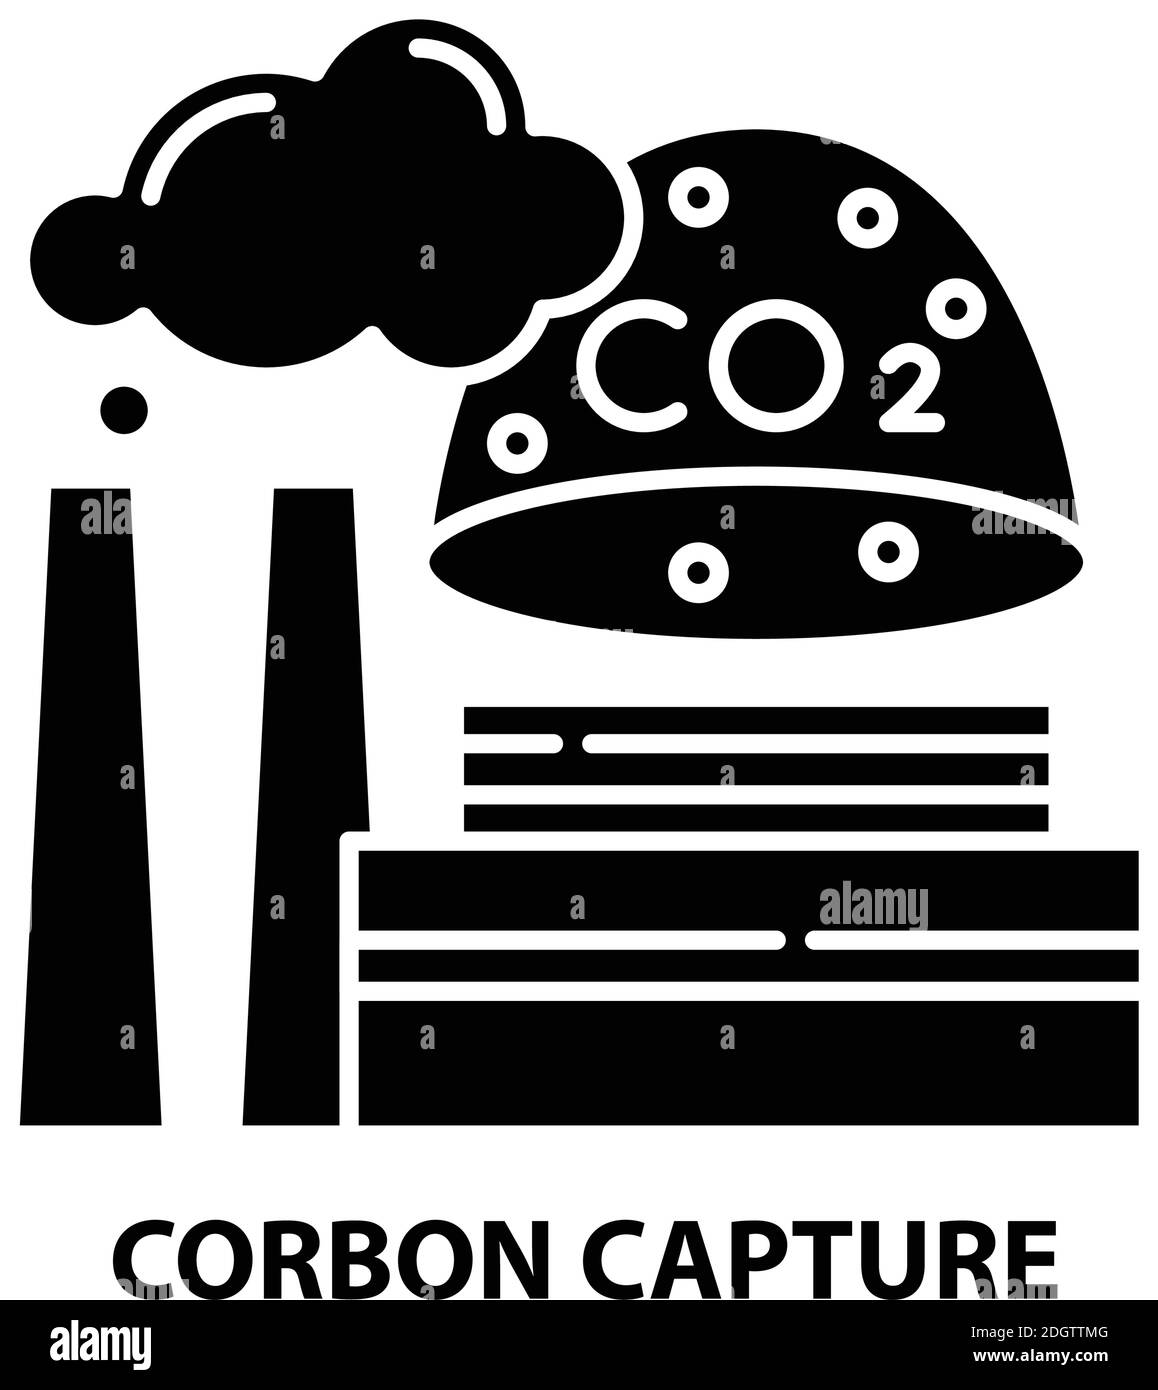 carbon capture icon, black vector sign with editable strokes, concept illustration Stock Vector